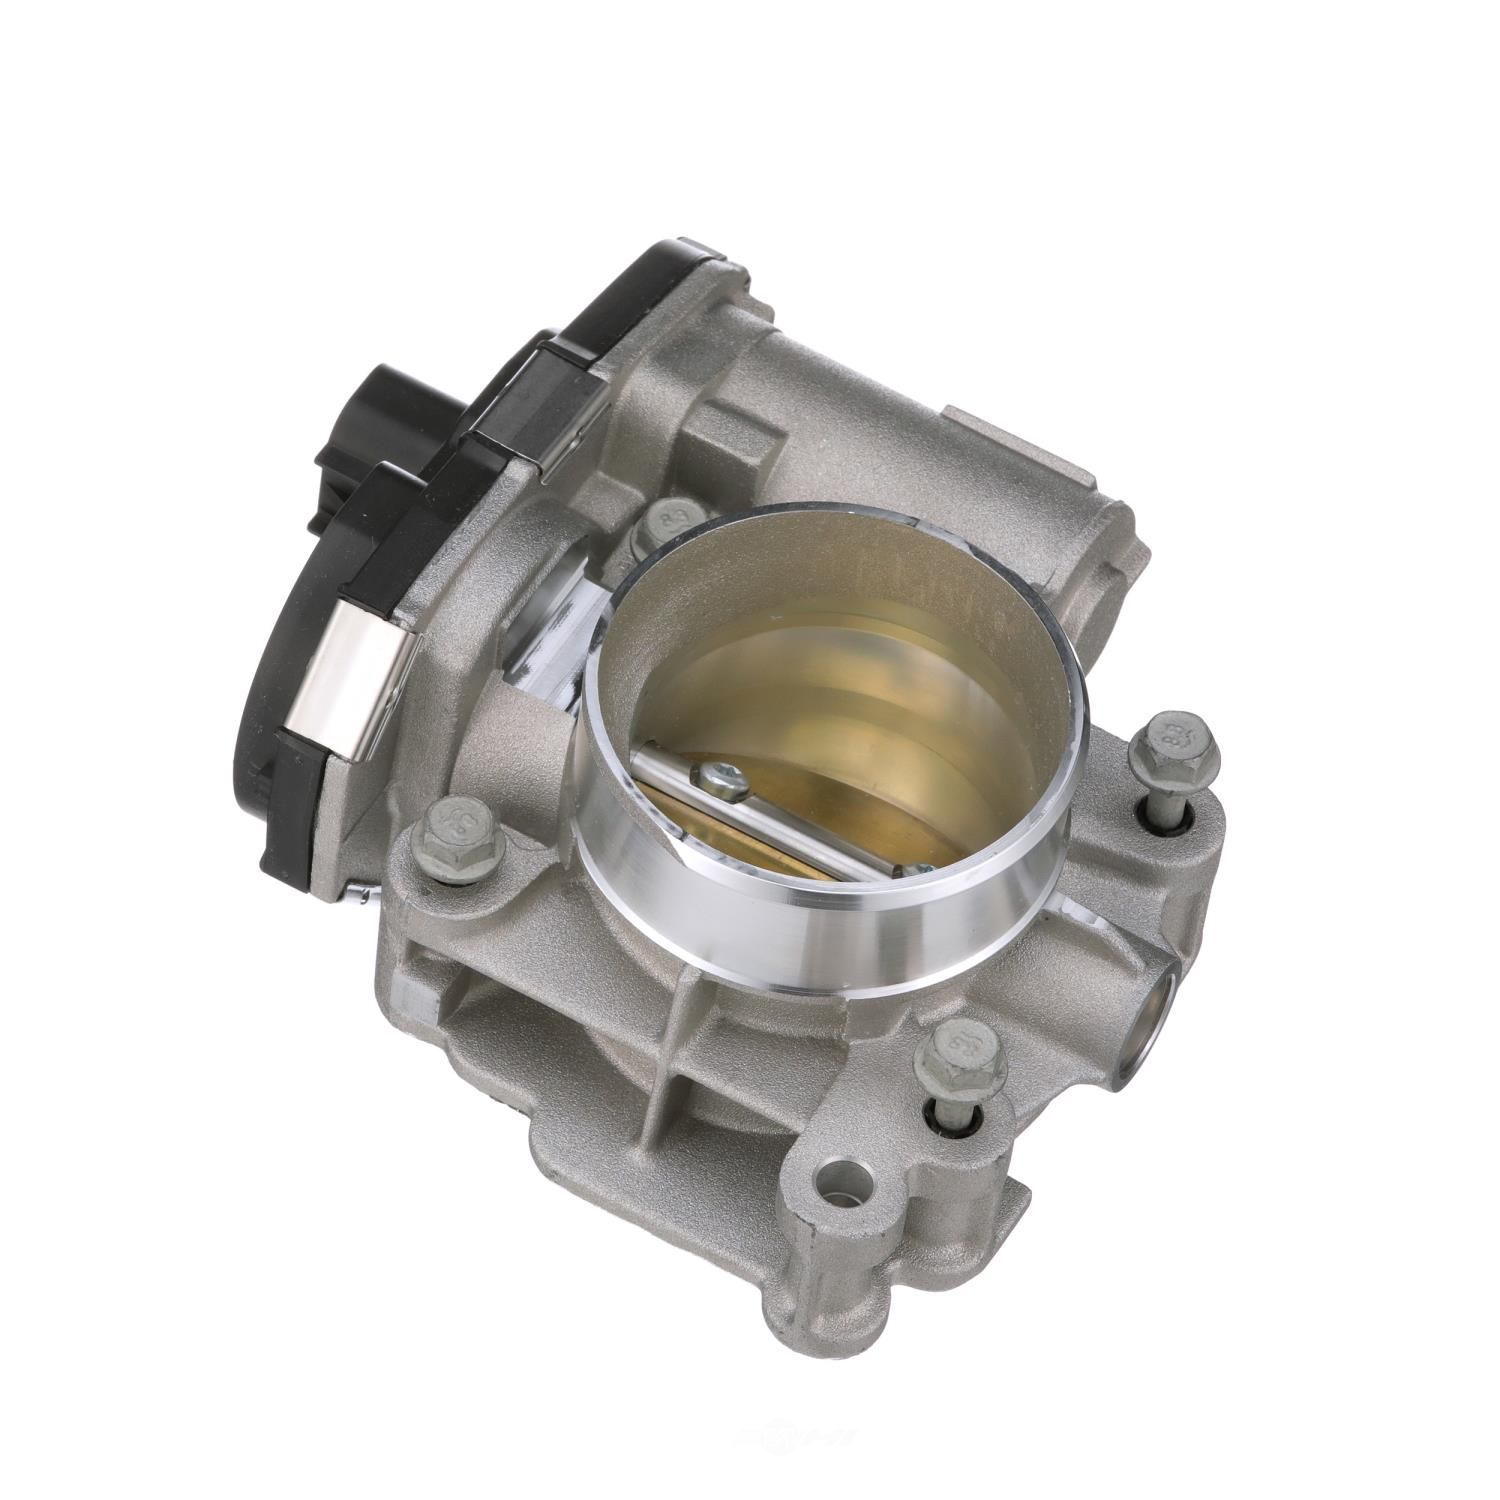 TECHSMART - Fuel Injection Throttle Body Assembly - TCS S20016